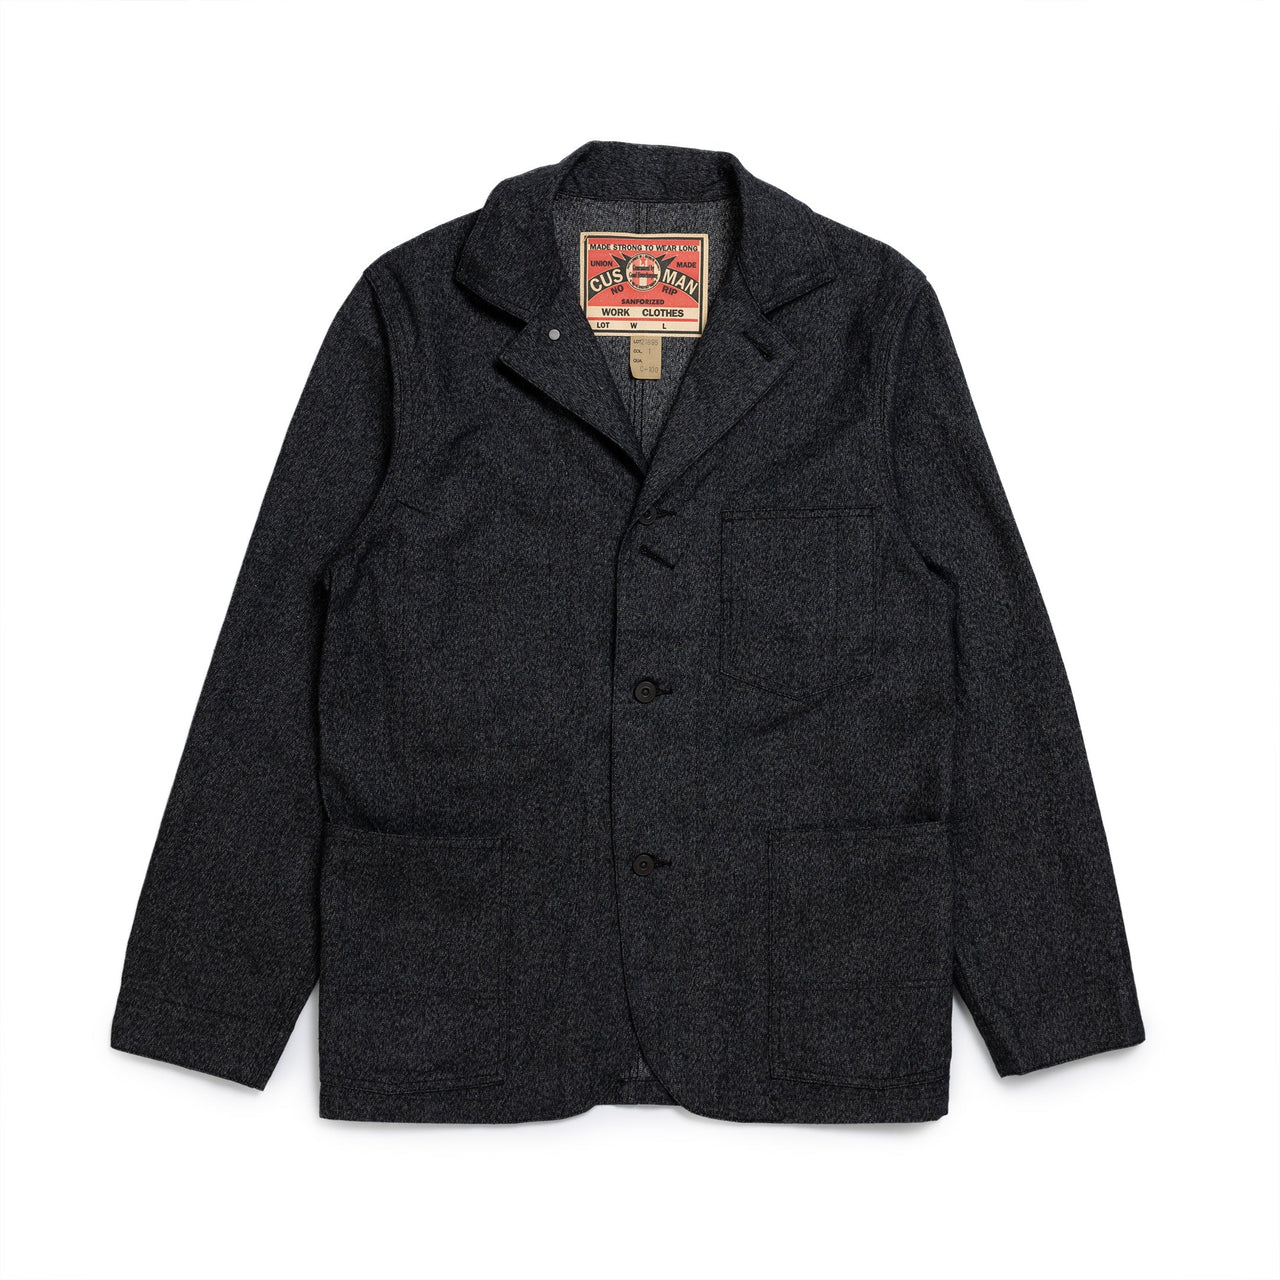 Cushman Lot. 21895 Black Chambray Coverall-Jacket-Clutch Cafe